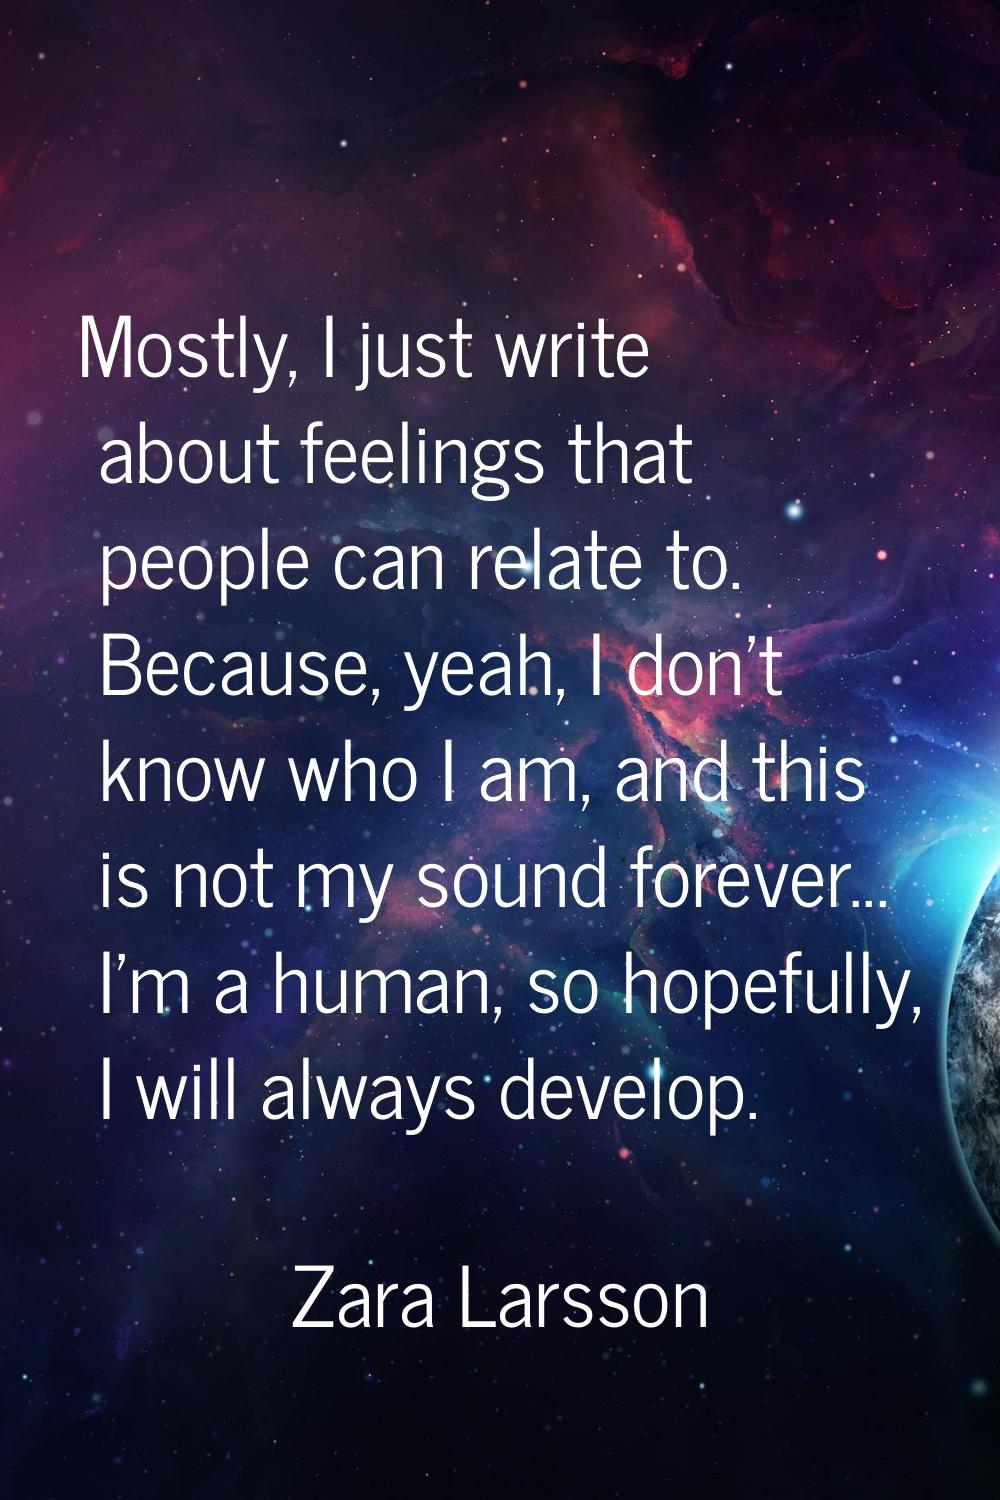 Mostly, I just write about feelings that people can relate to. Because, yeah, I don't know who I am